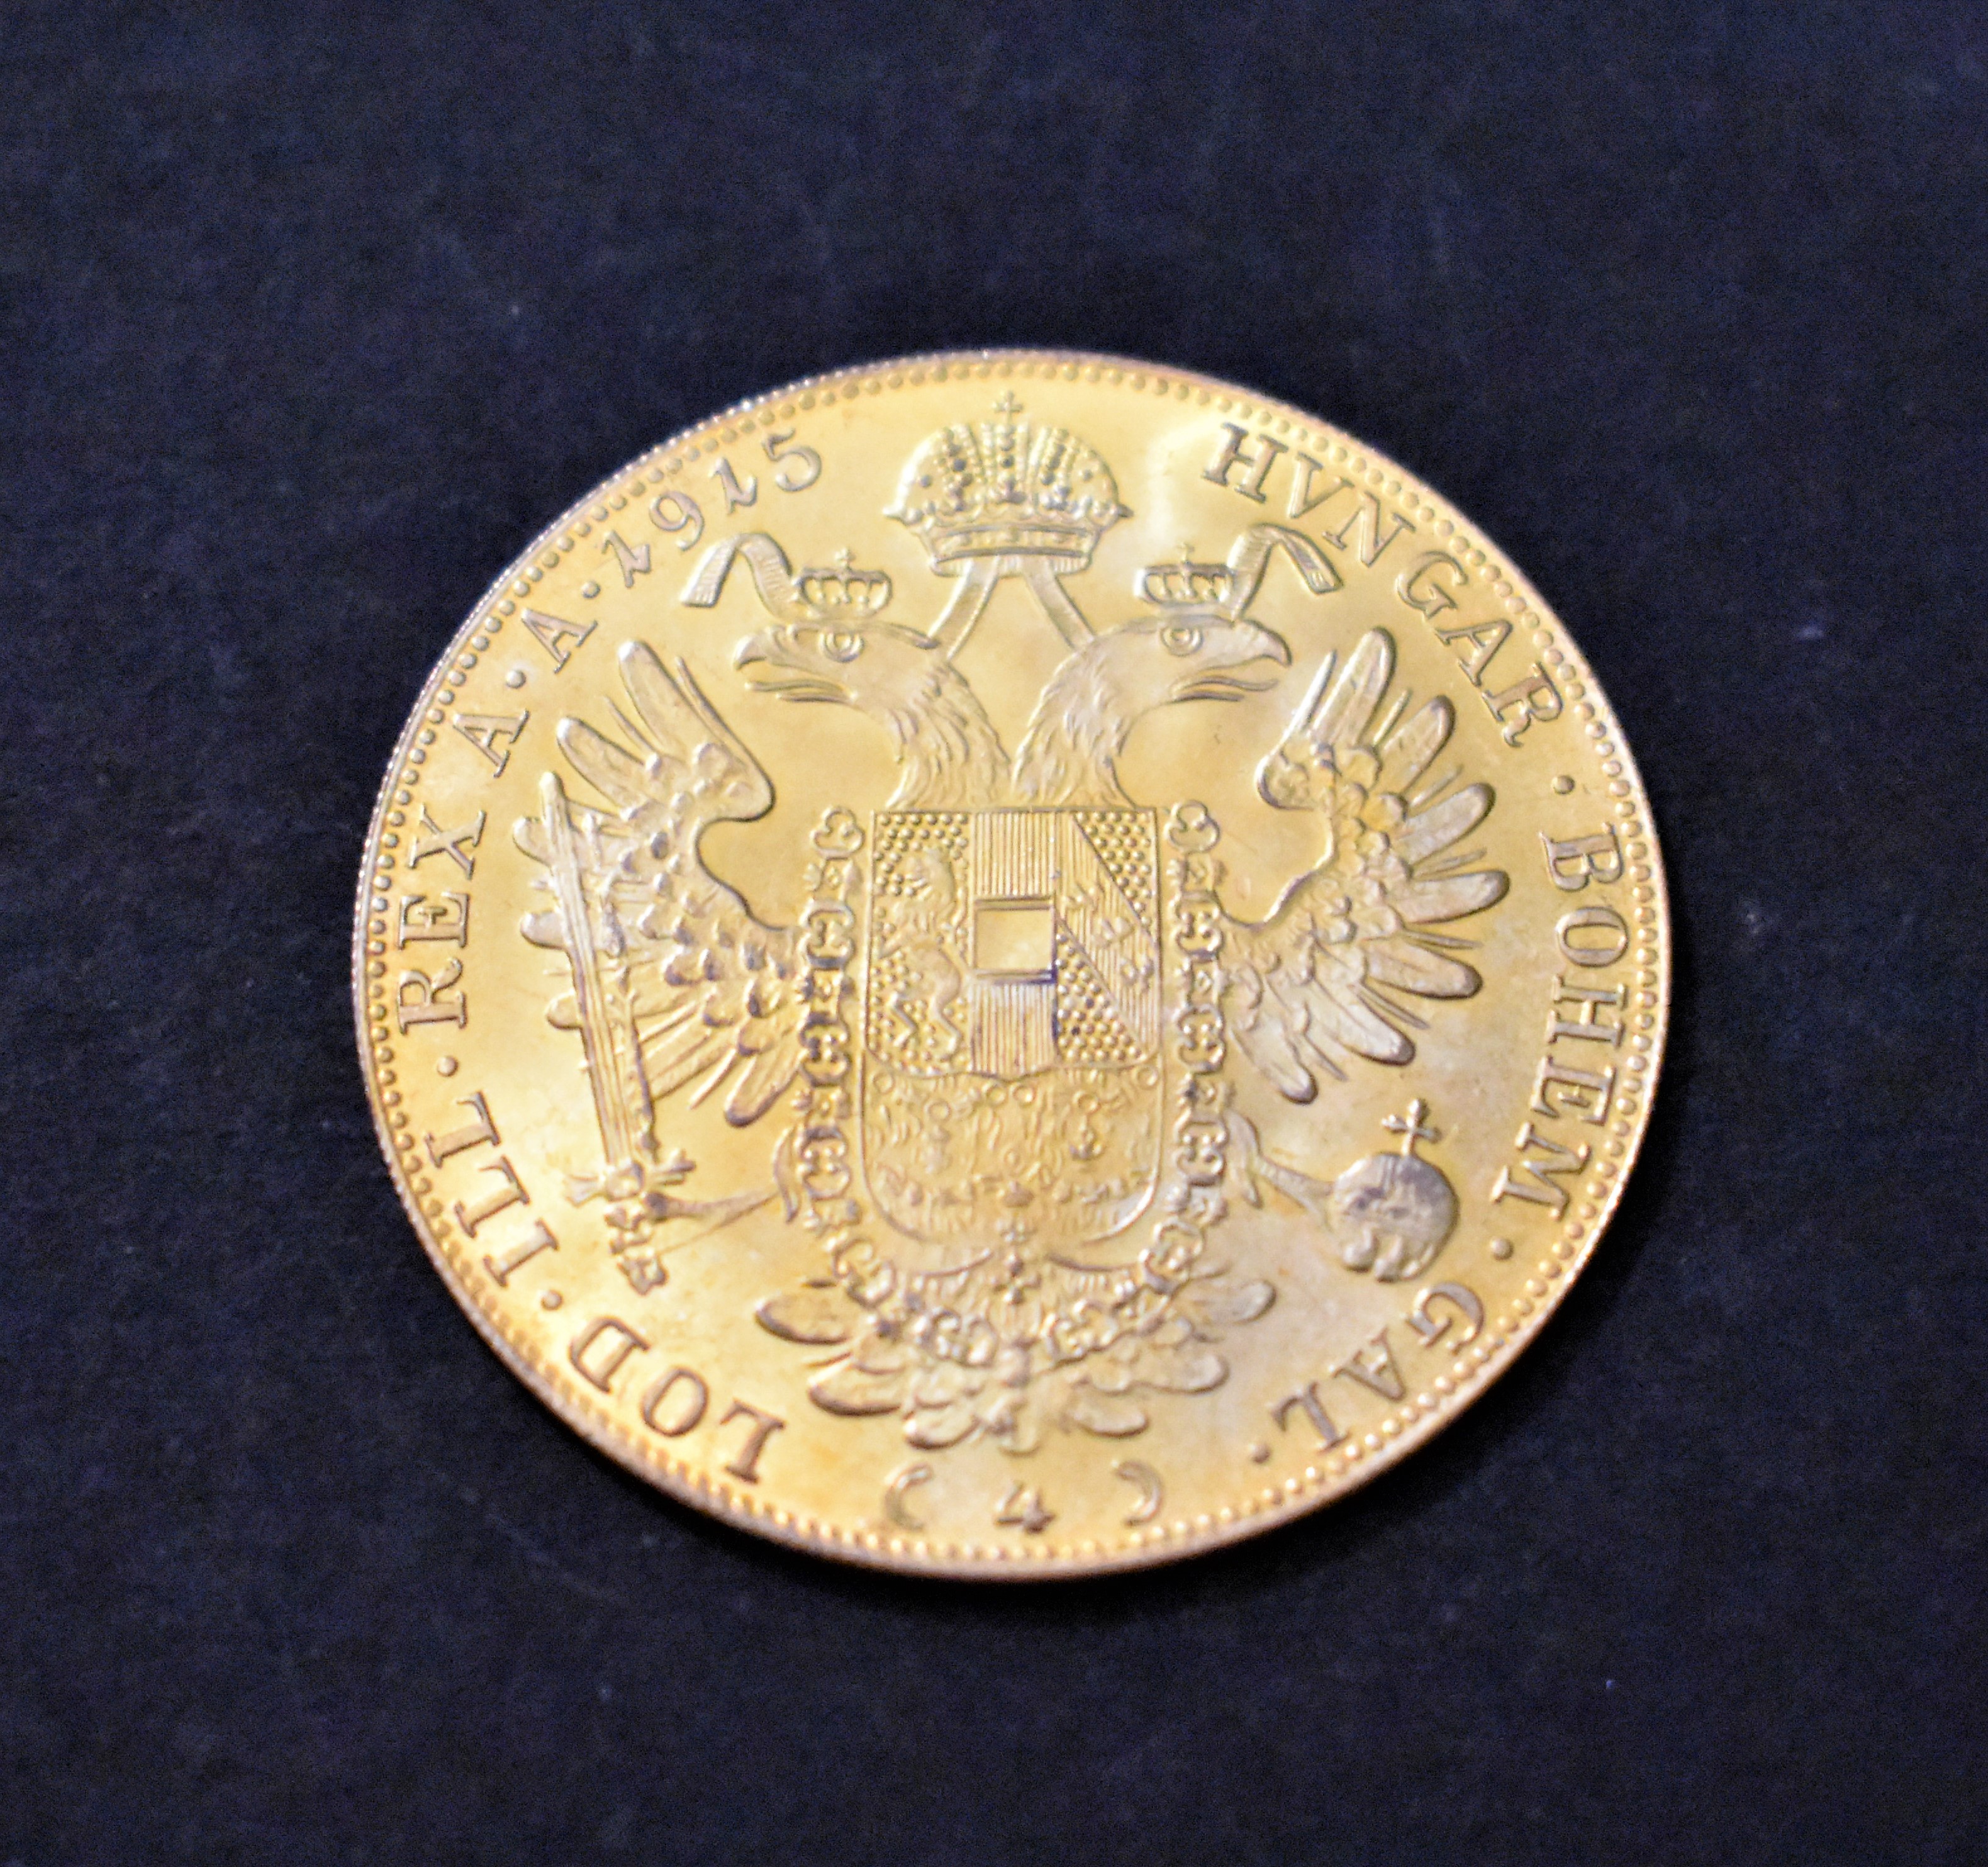 Gold Austria 1915 Restrike Four Ducat Gold Plated on Copper - Image 2 of 2